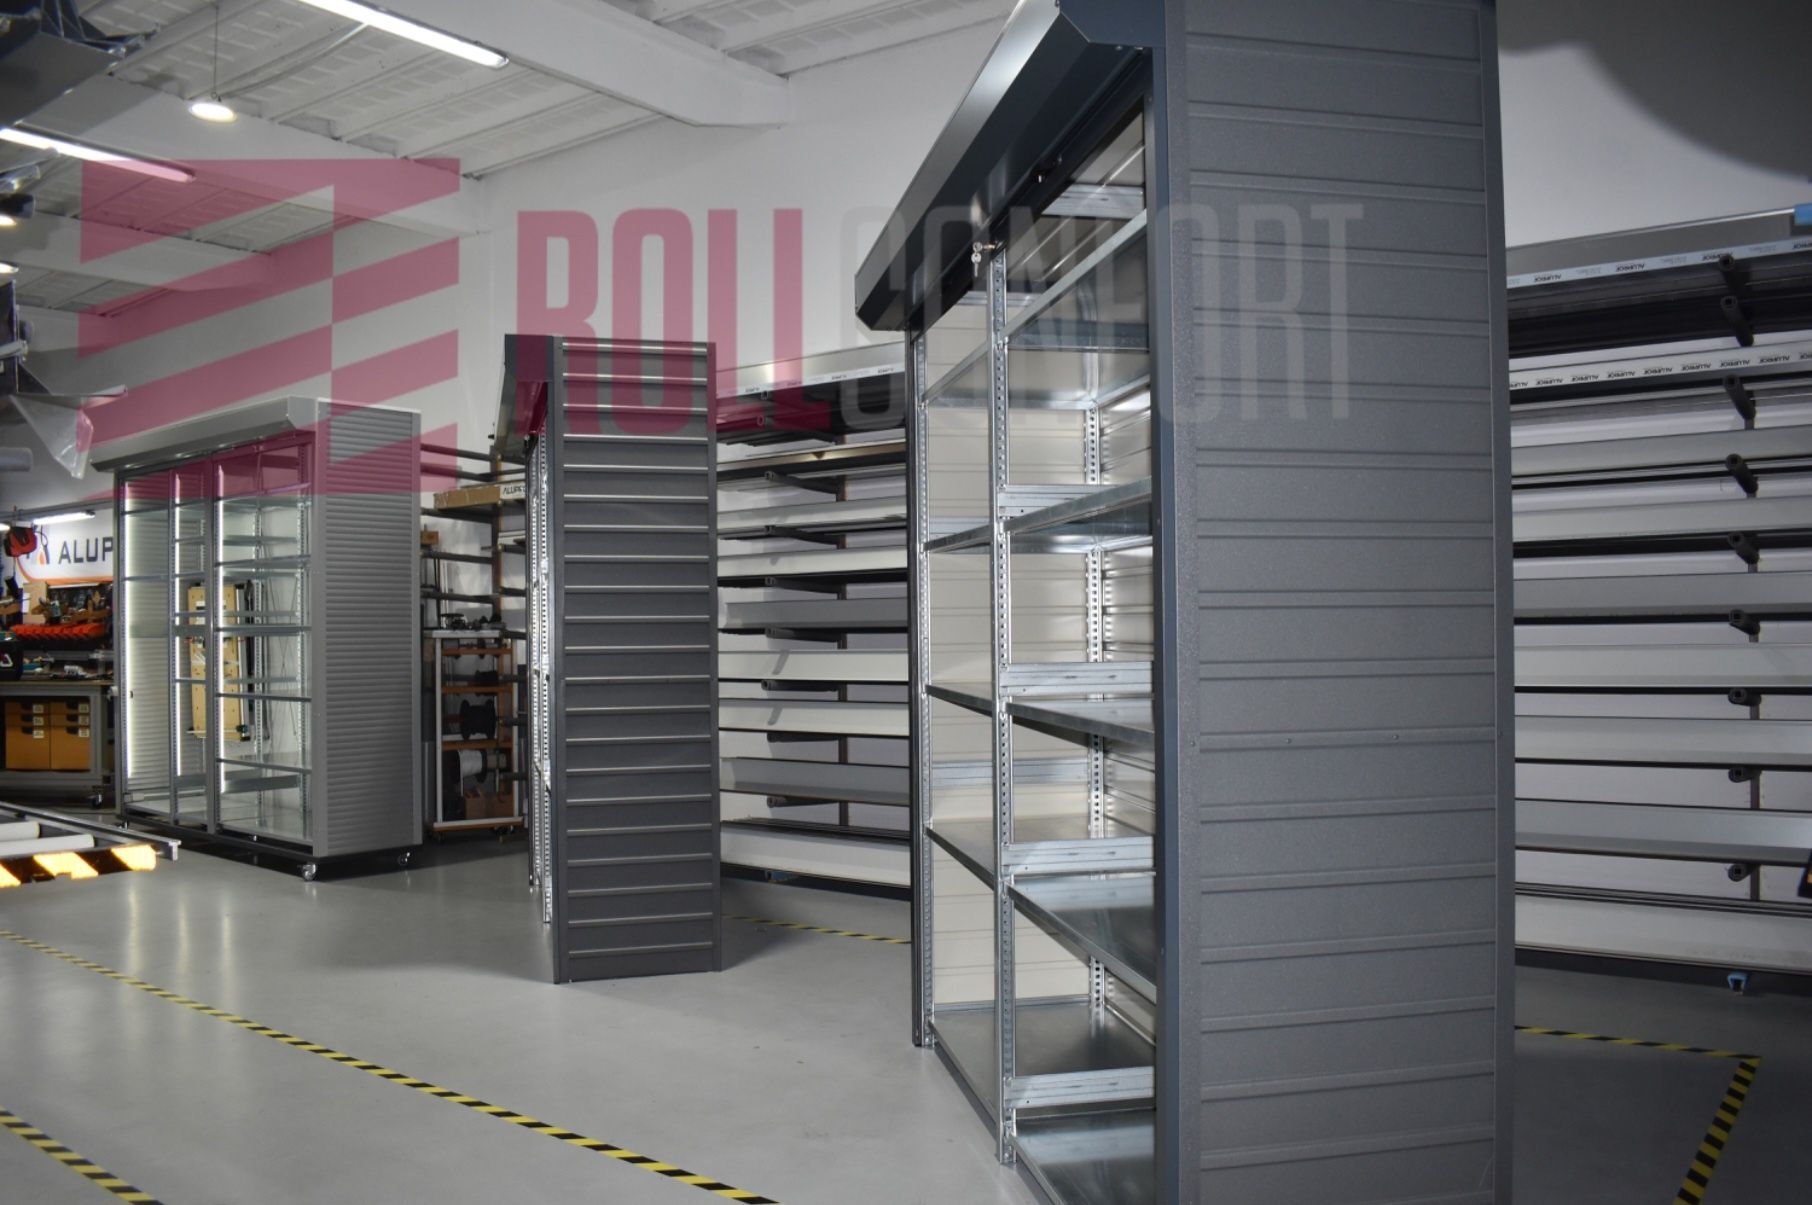 Dulap parcare Cluj BoxRoll metalic - producator Rollconfort Systems